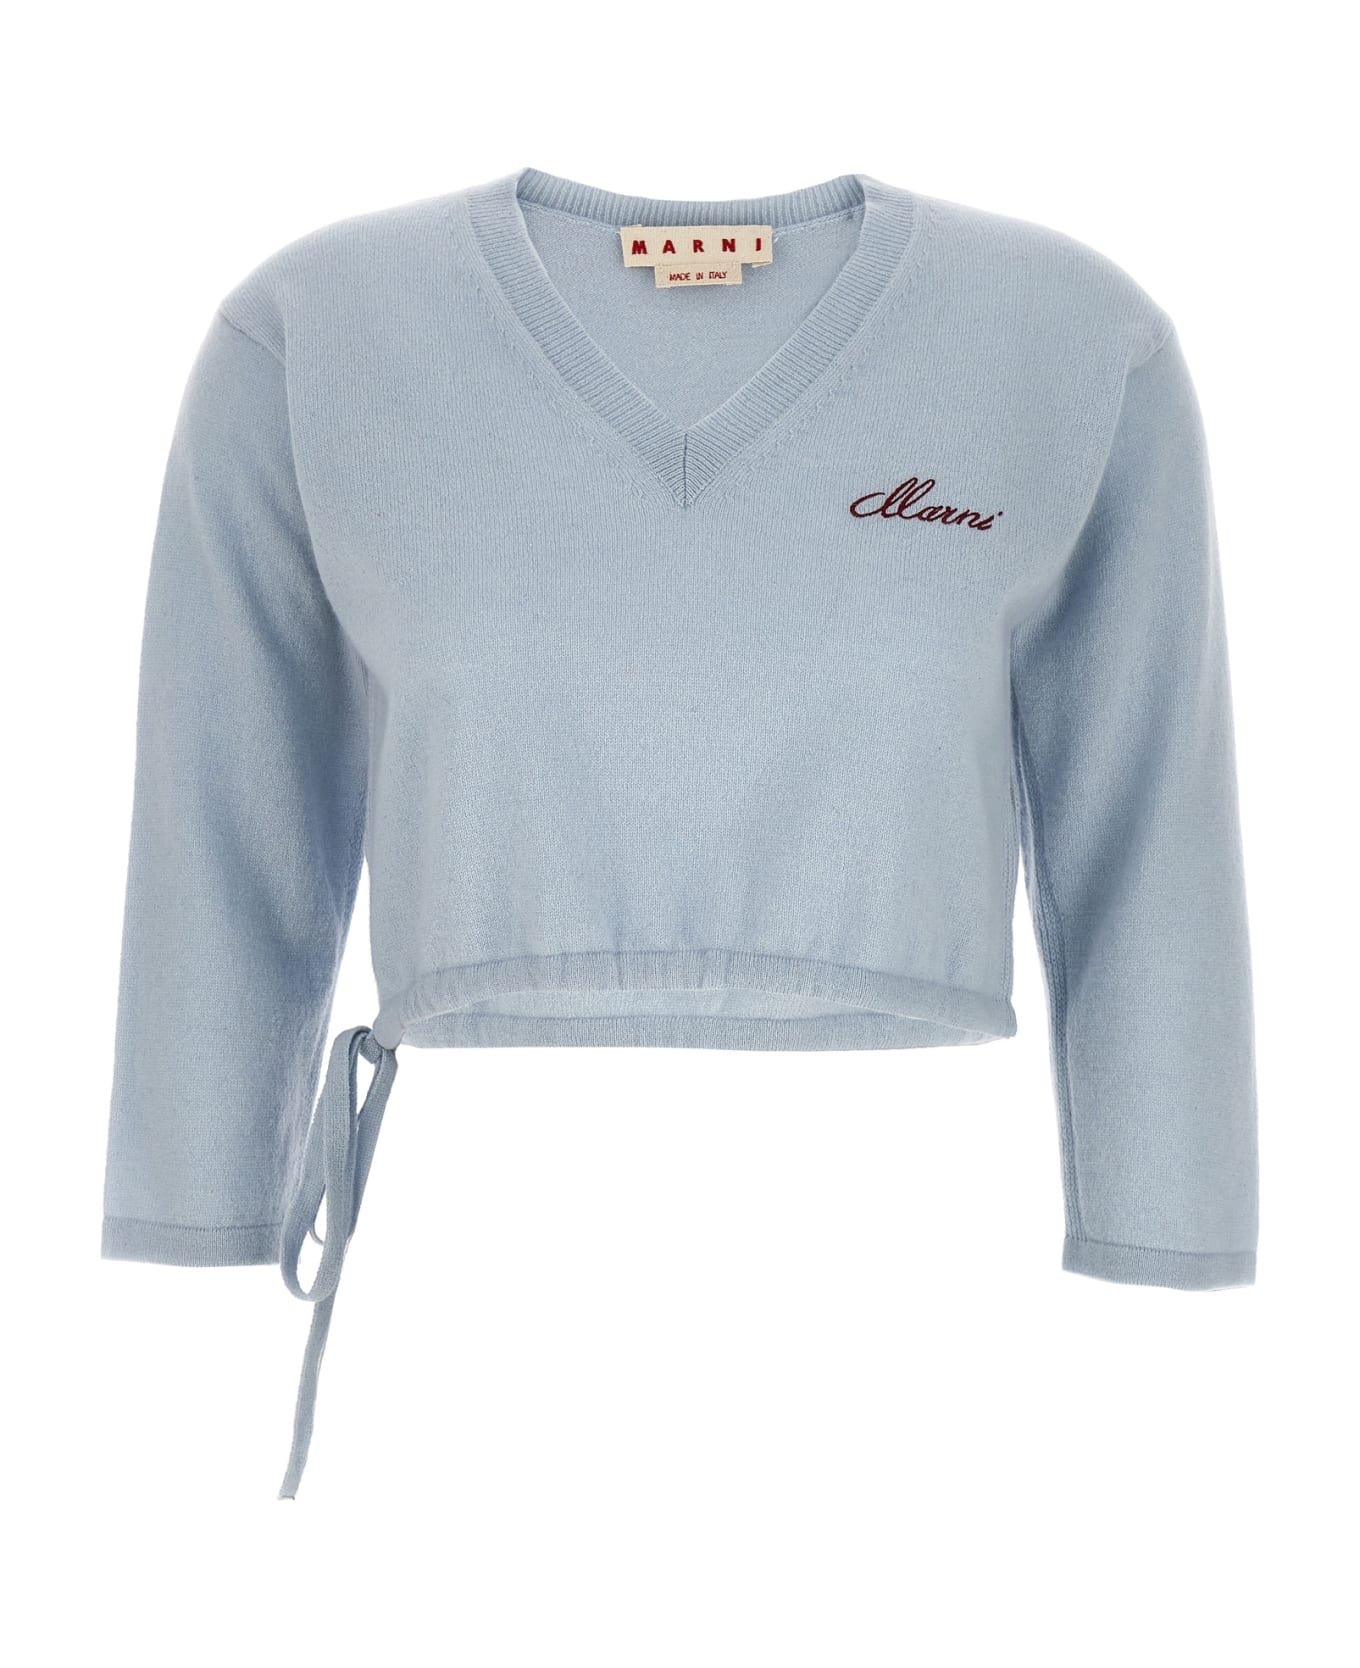 Marni Light Blue Short Sweater With Logo And Drawstring - Blue